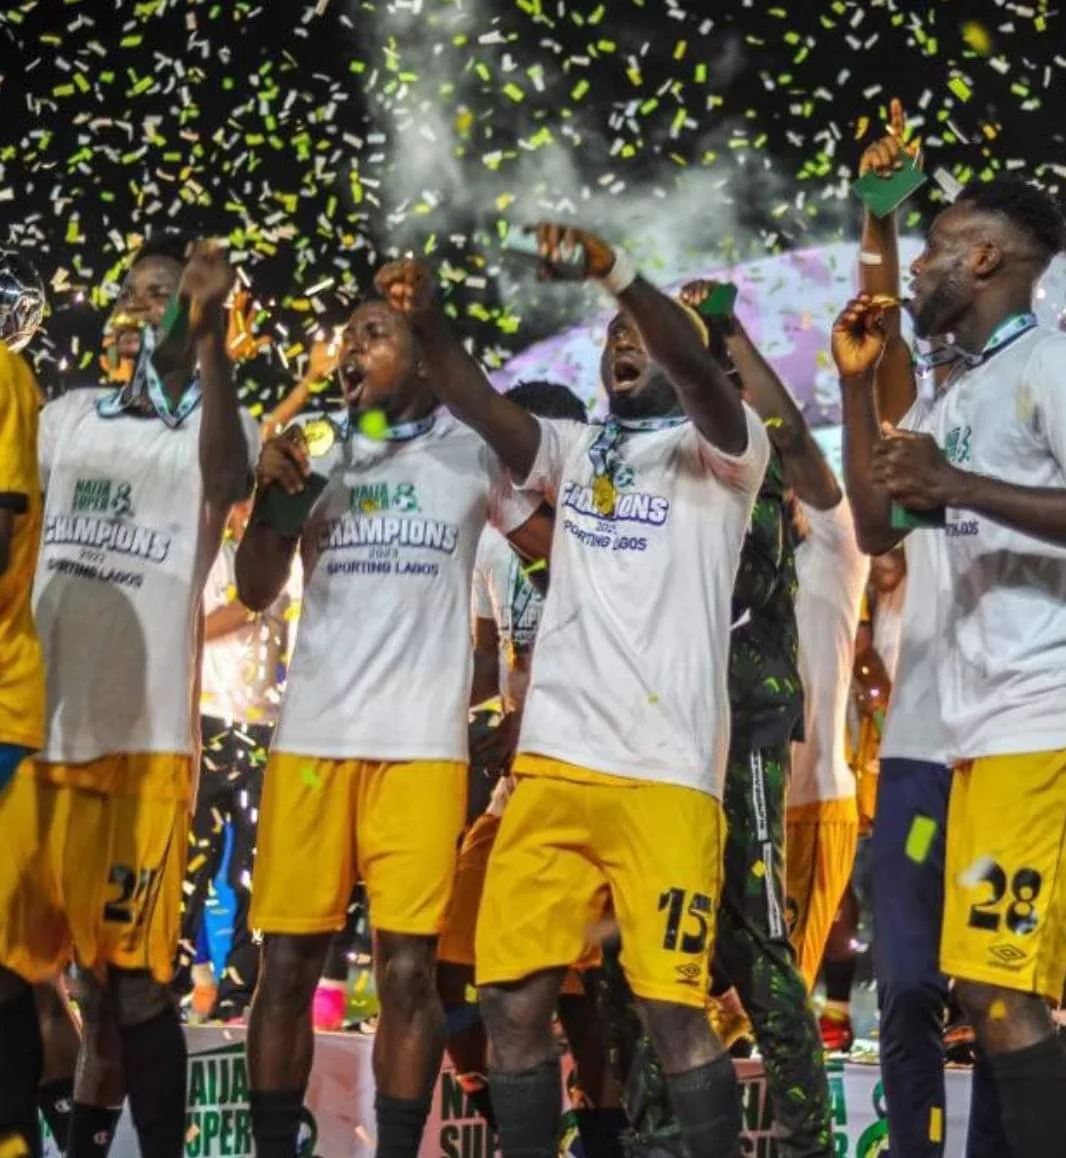 Football Club based in Lagos, Sporting Lagos lifts the Super 8 title